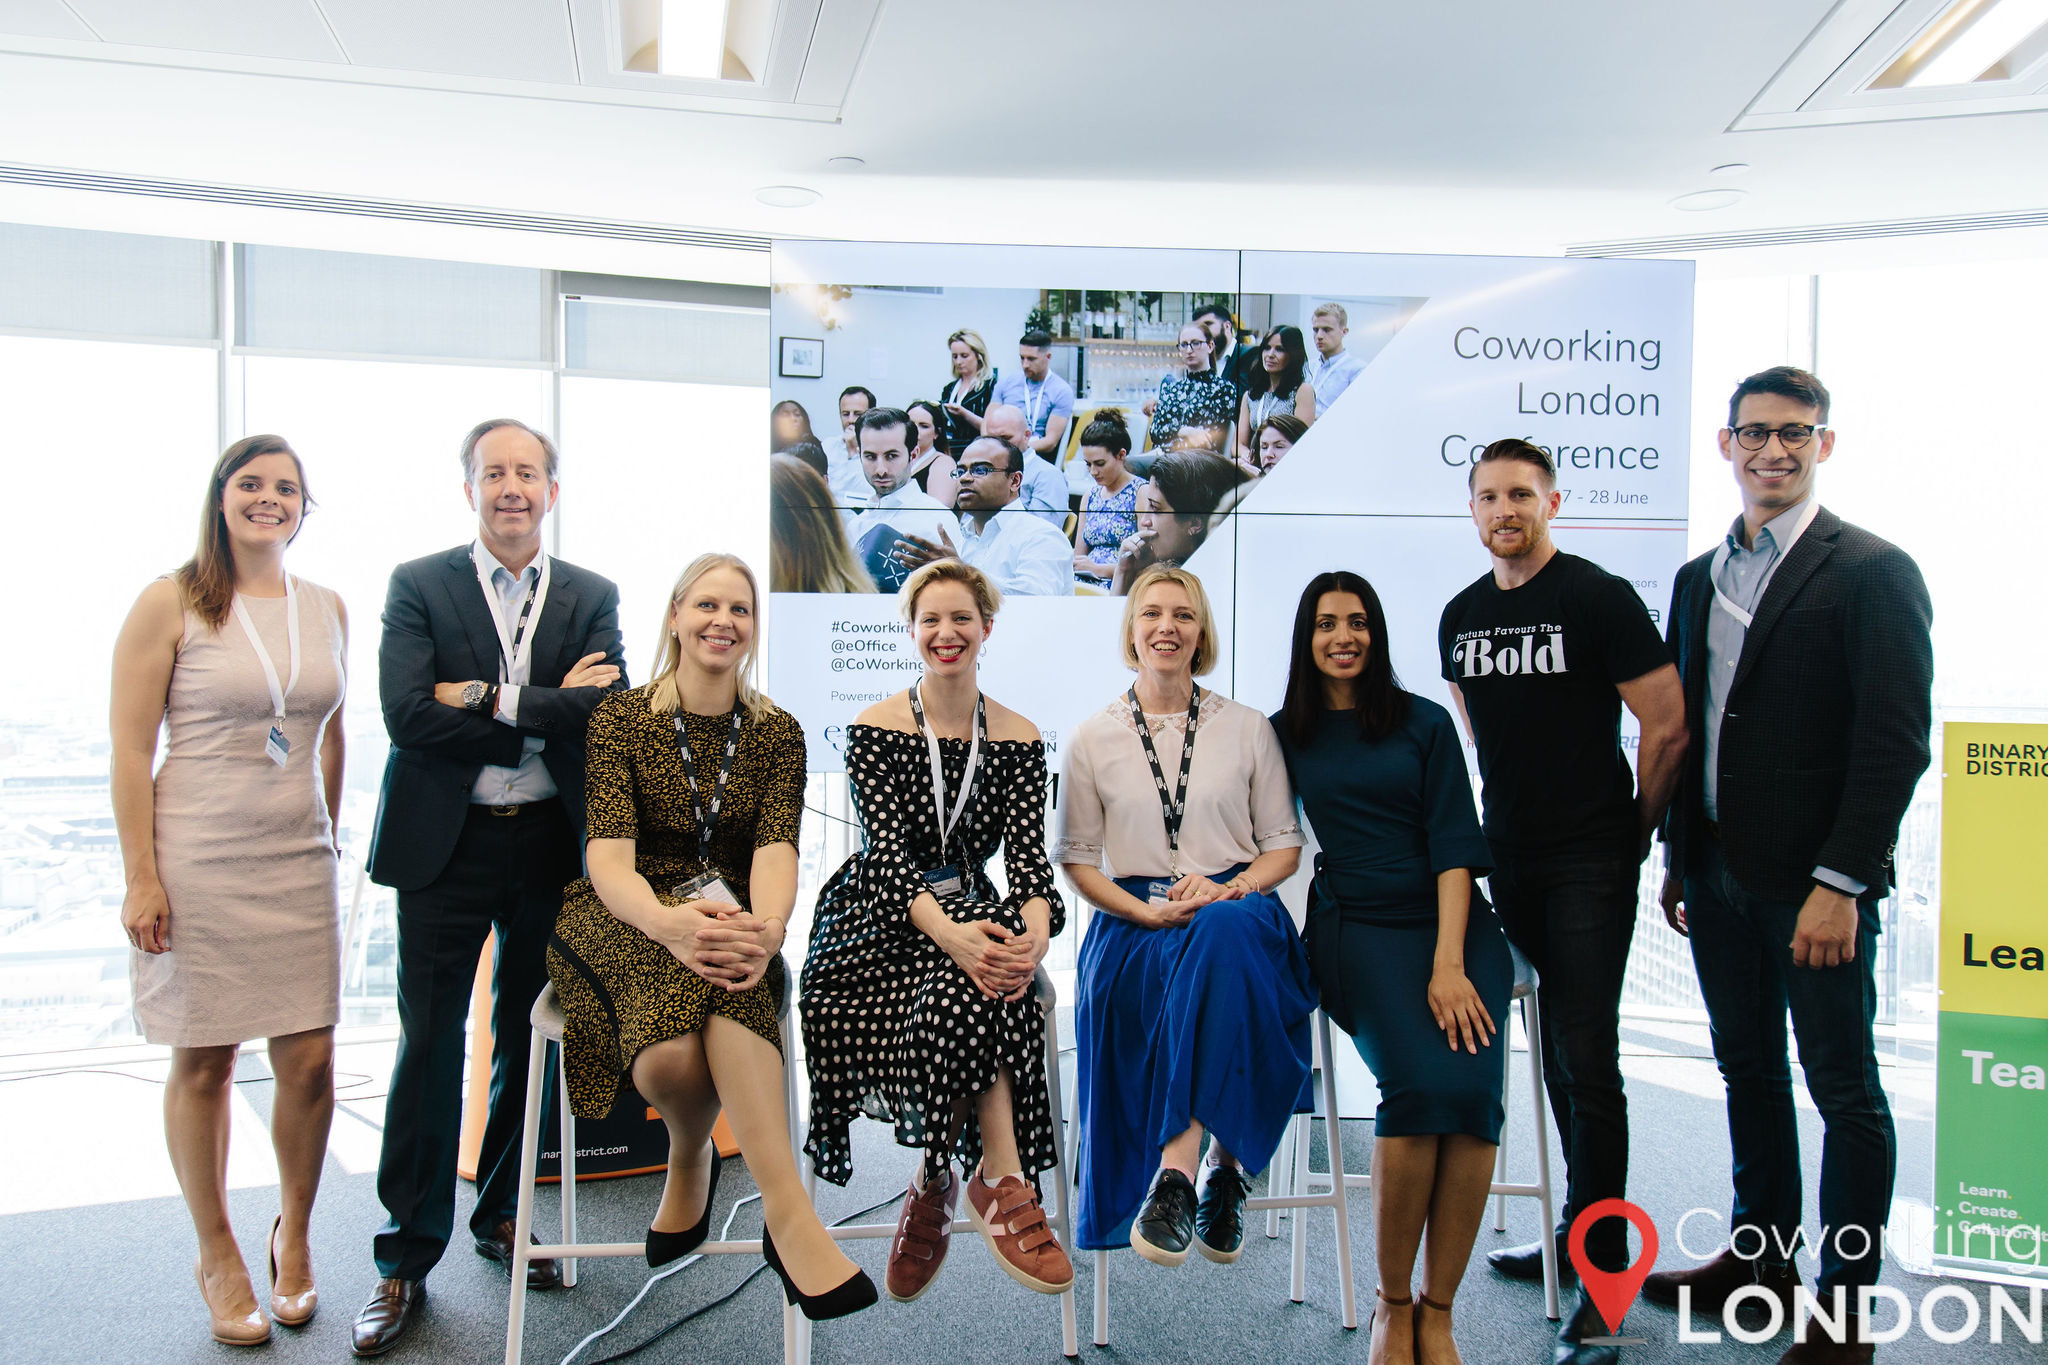 Coworking London Conference: Coworking Stats + Trends